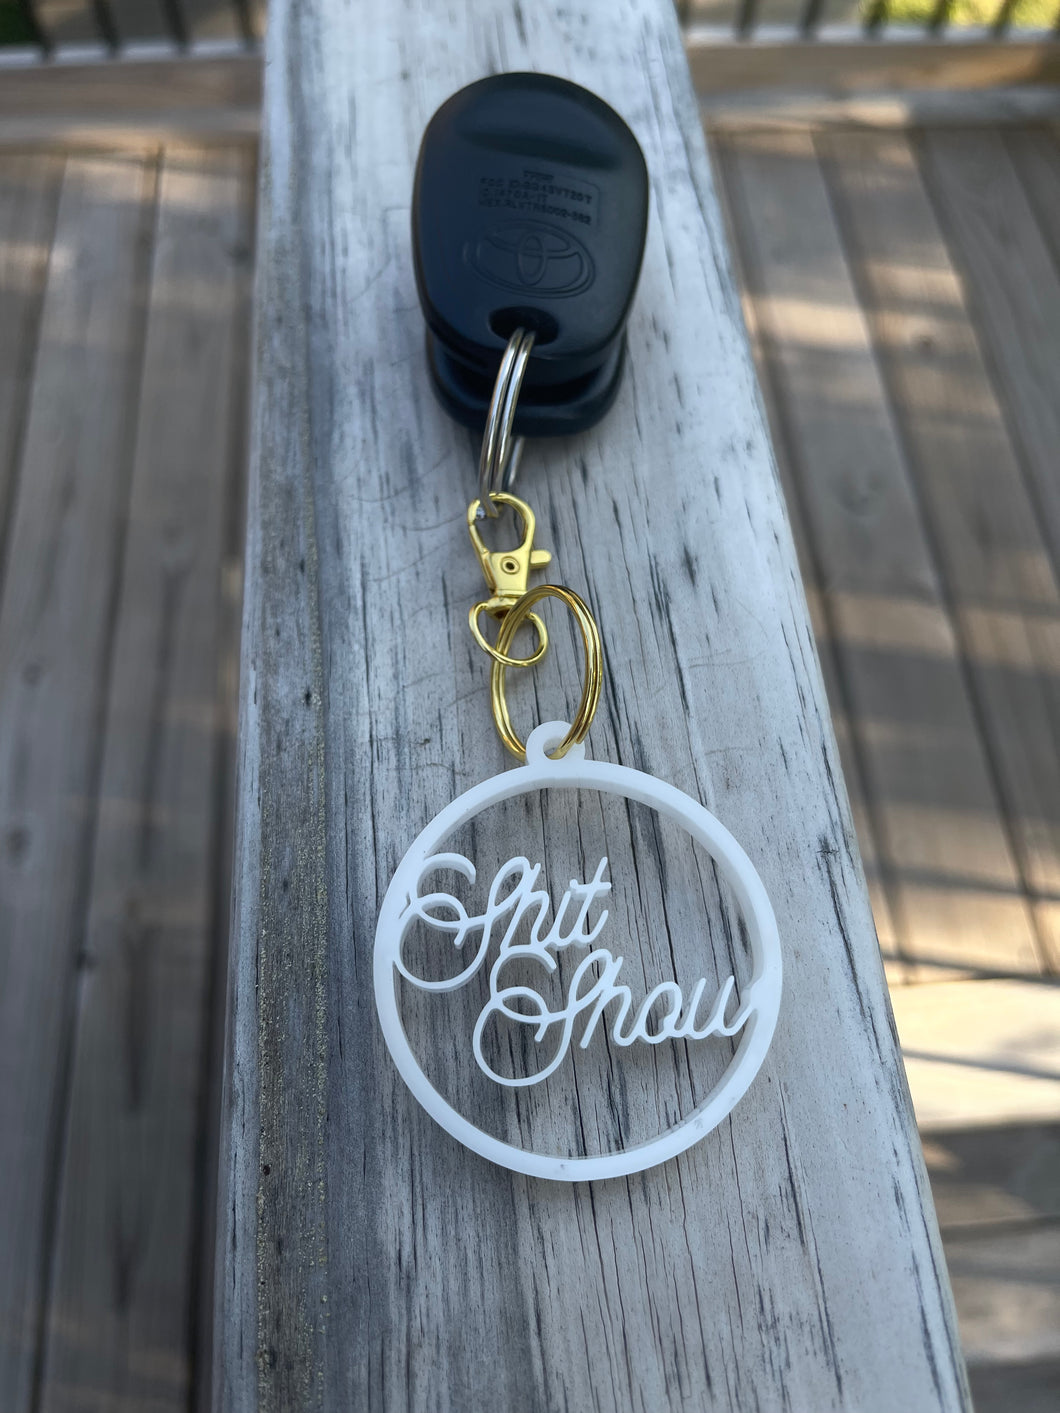 Shit Show Small keychain